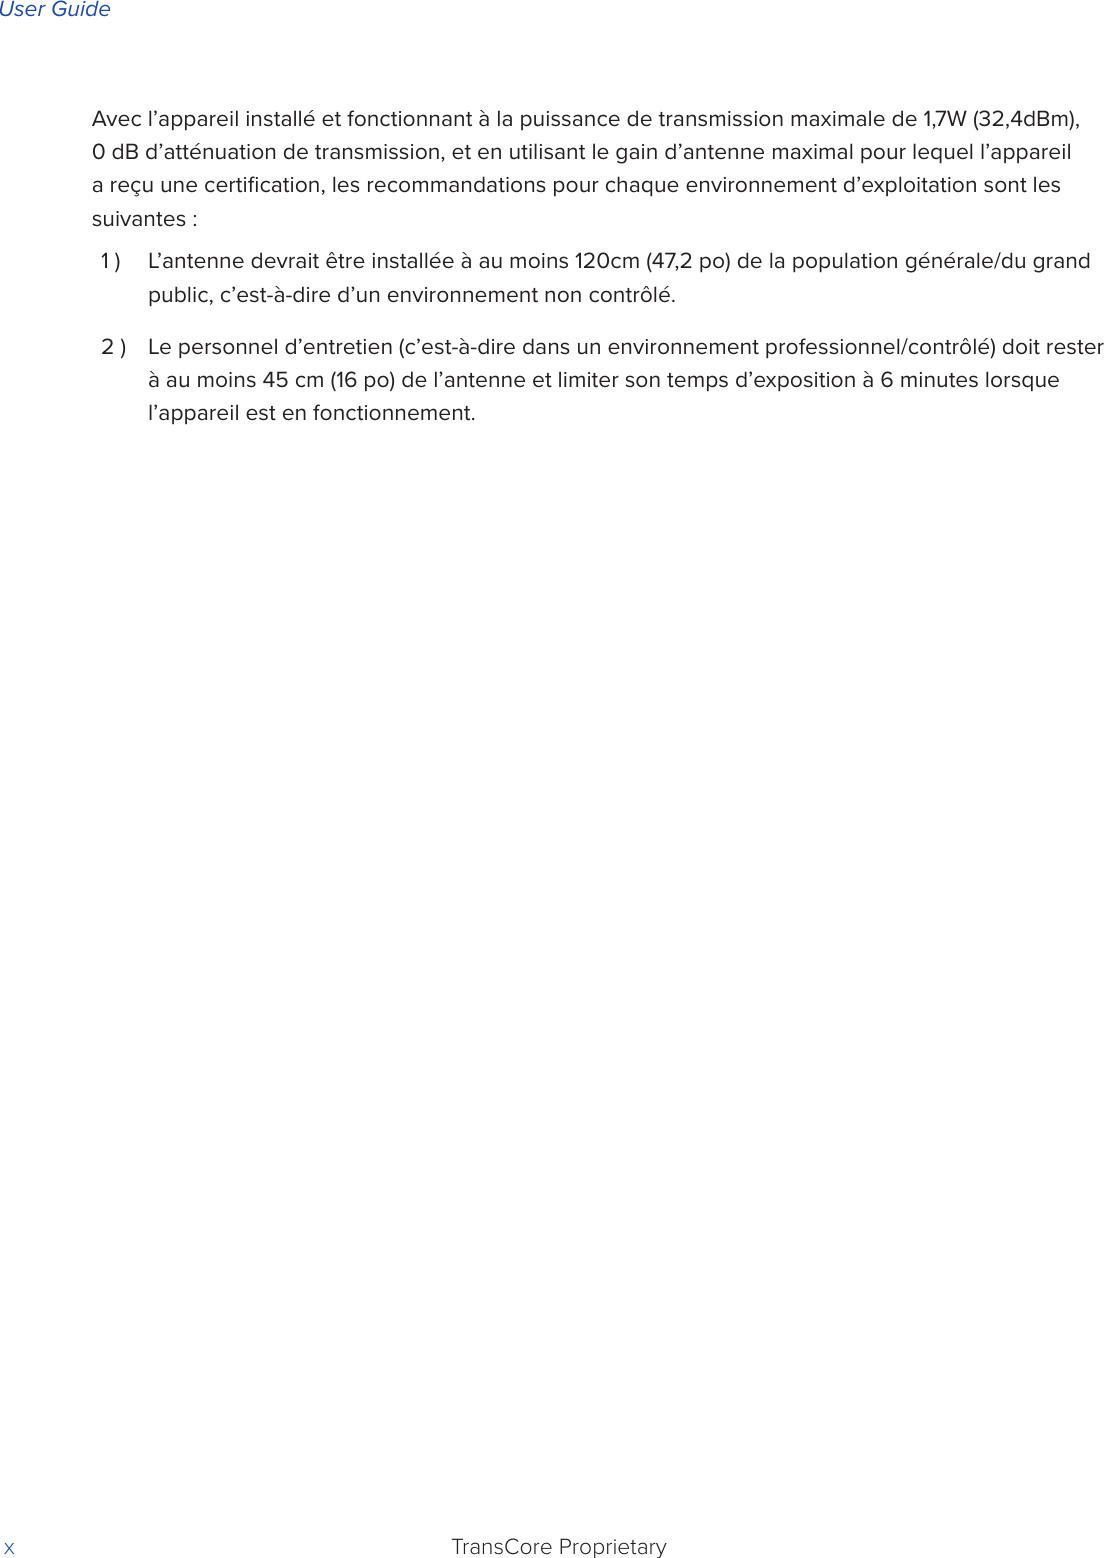 Page 10 of TransCore MPRXV1 Multiprotocol Reader Extreme User Manual A1422E Cover X5a